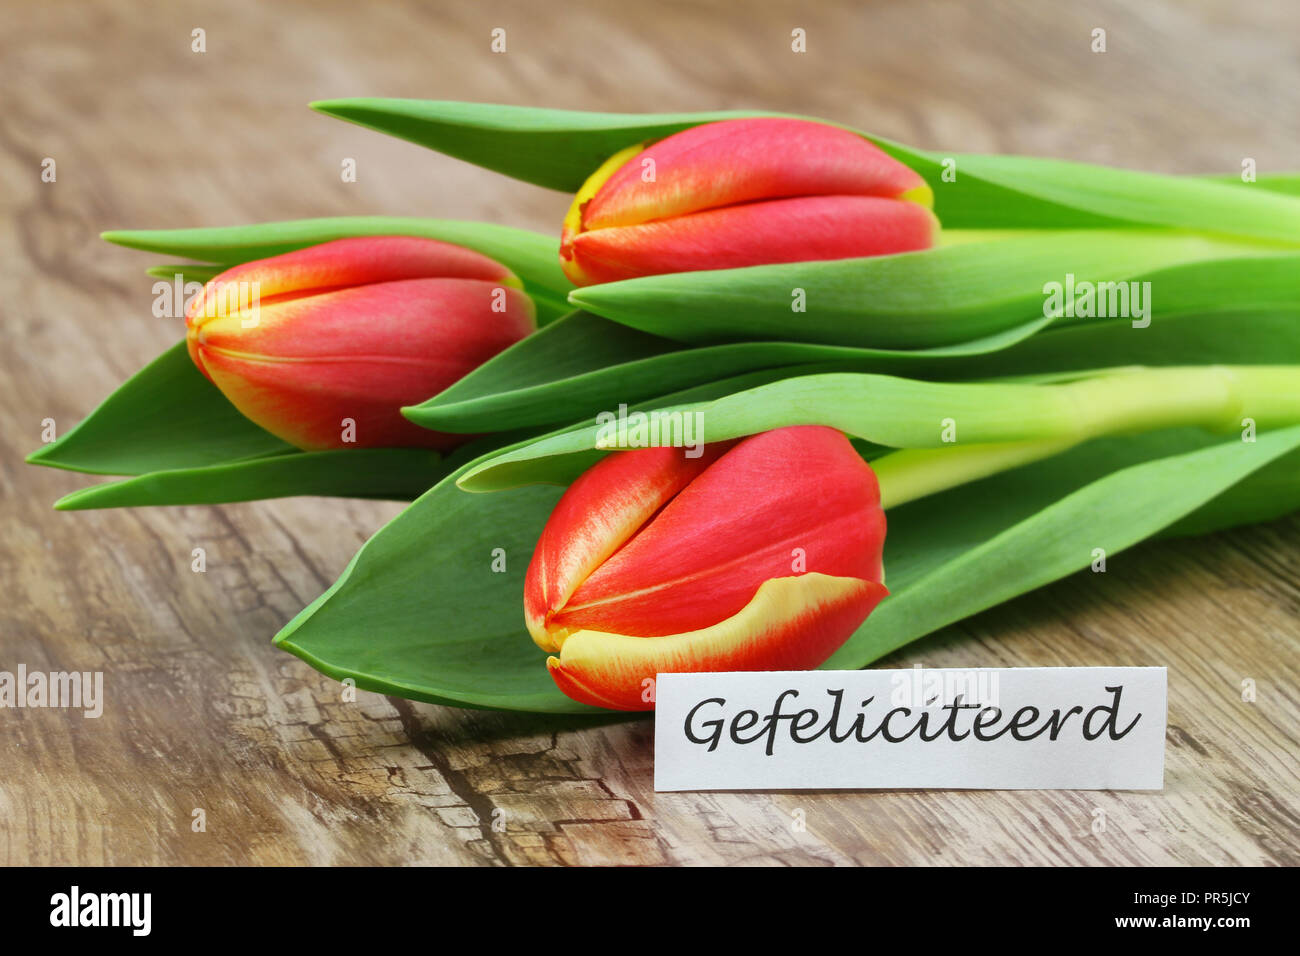 Gefeliciteerd (Congratulations in Dutch) card with one red and yellow tulips Stock Photo